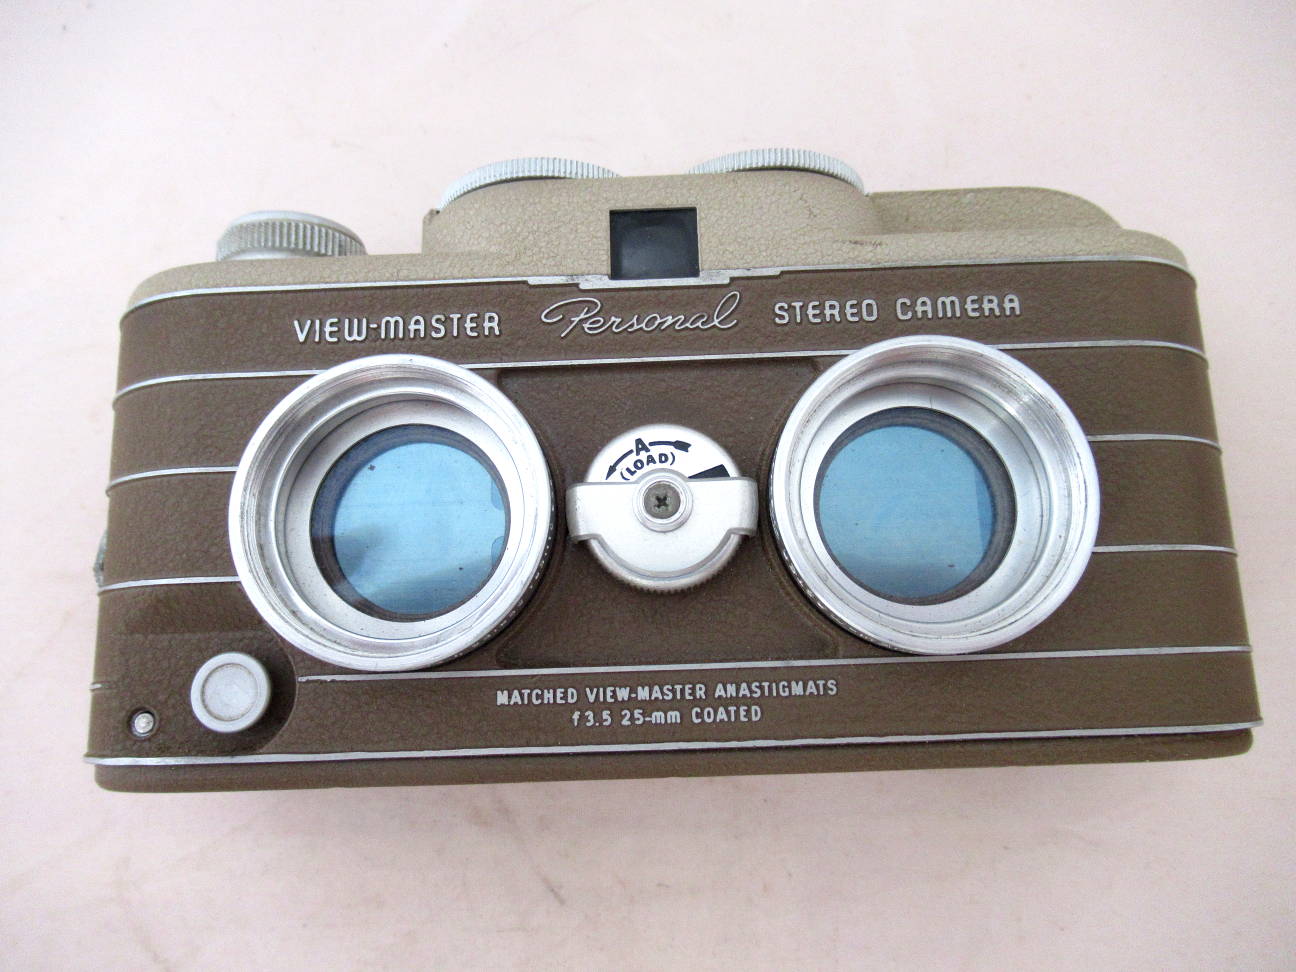 Sawyer's View-Master Personal Stereo Camera